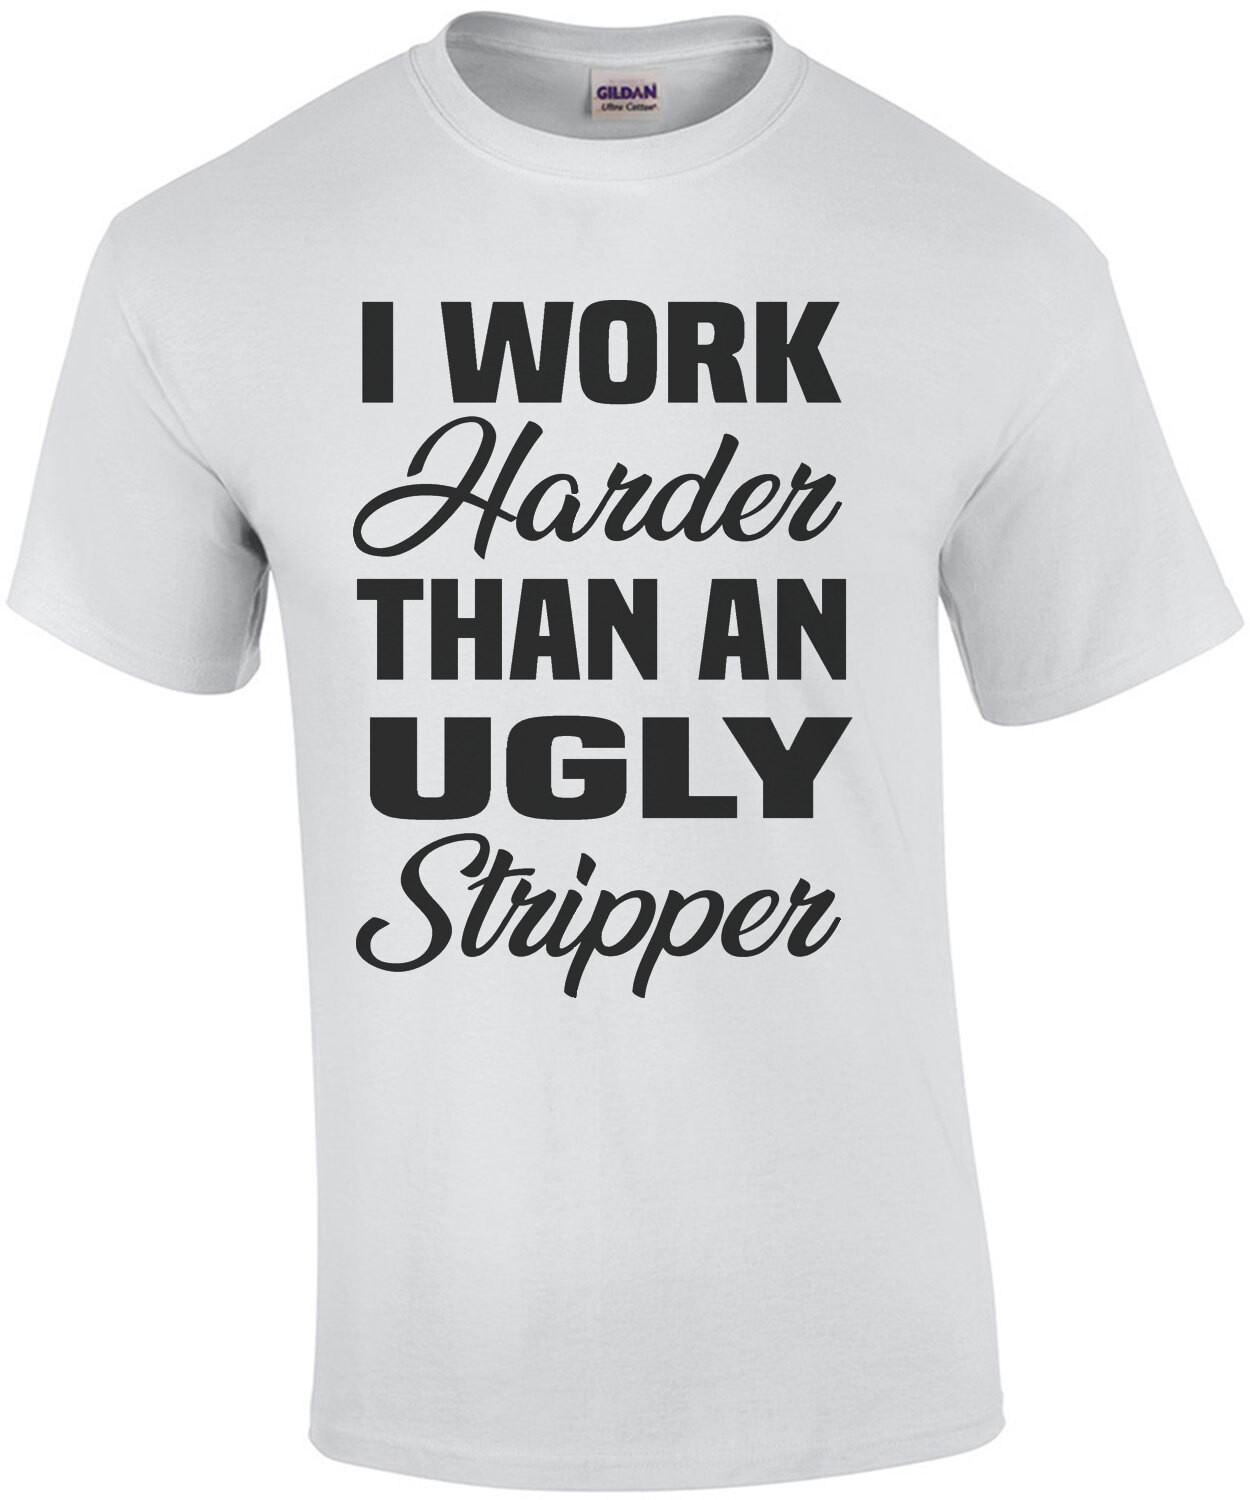 I work harder than an ugly stripper - funny offensive t-shirt